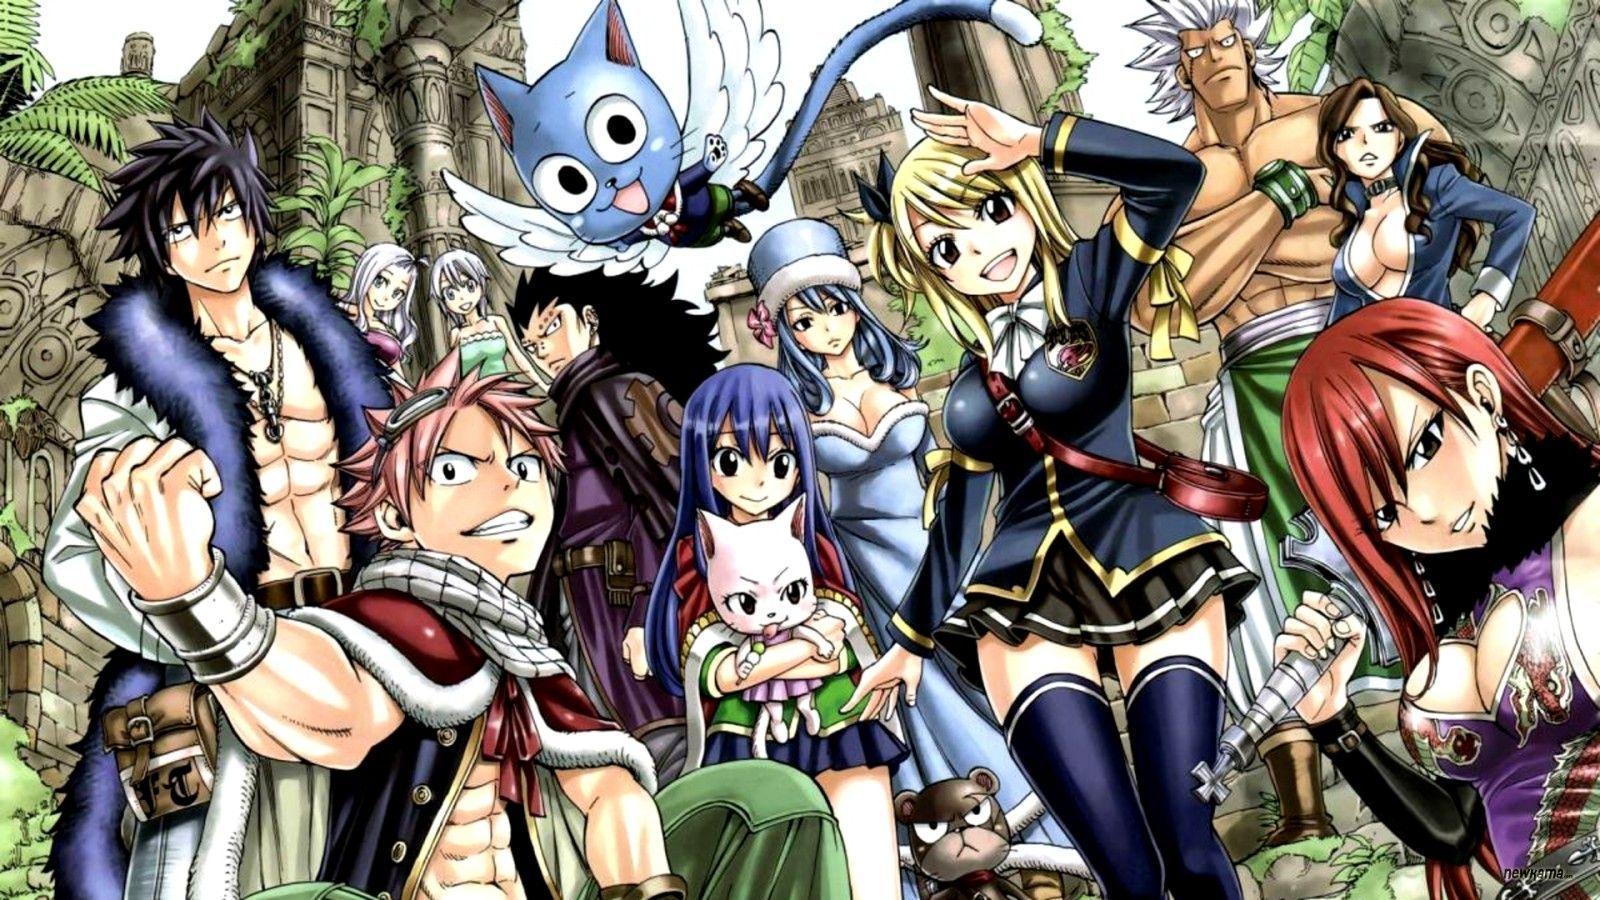 Fairy Tail wallpaper HD 2016. Wallpaper, Background, Image